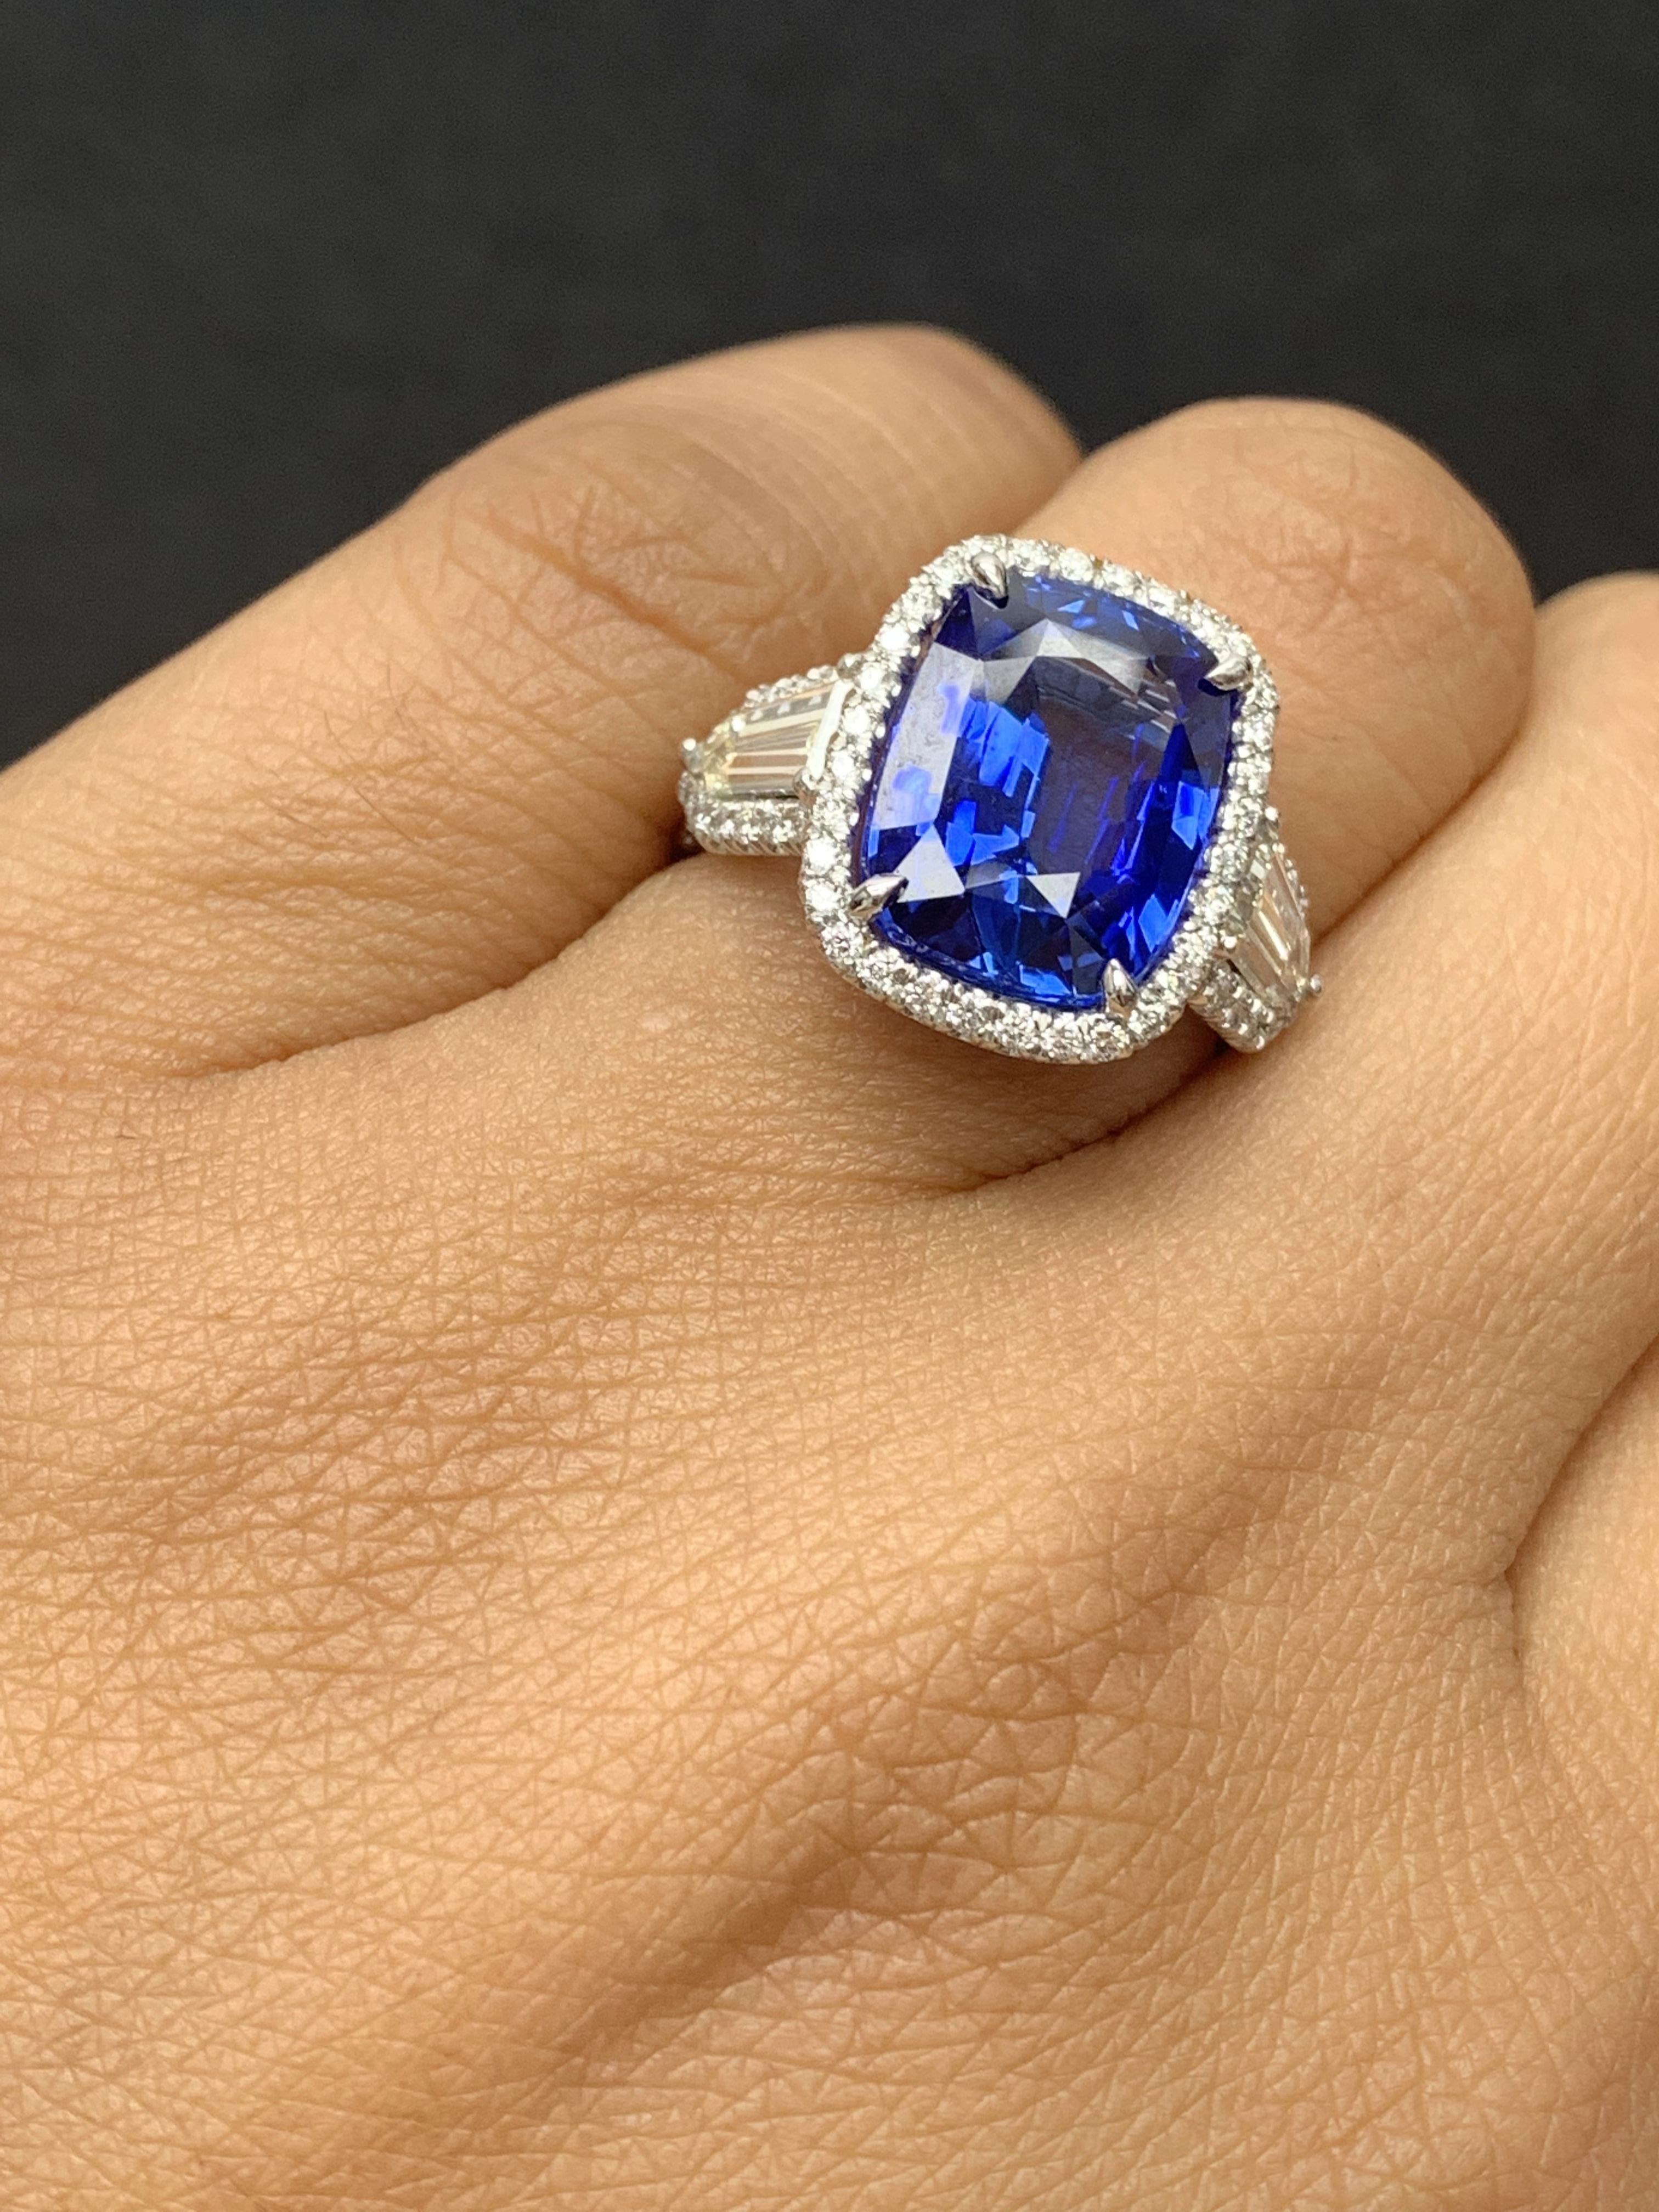 7.51 Carat Cushion Cut Sapphire and Diamond Engagement Ring in Platinum For Sale 11